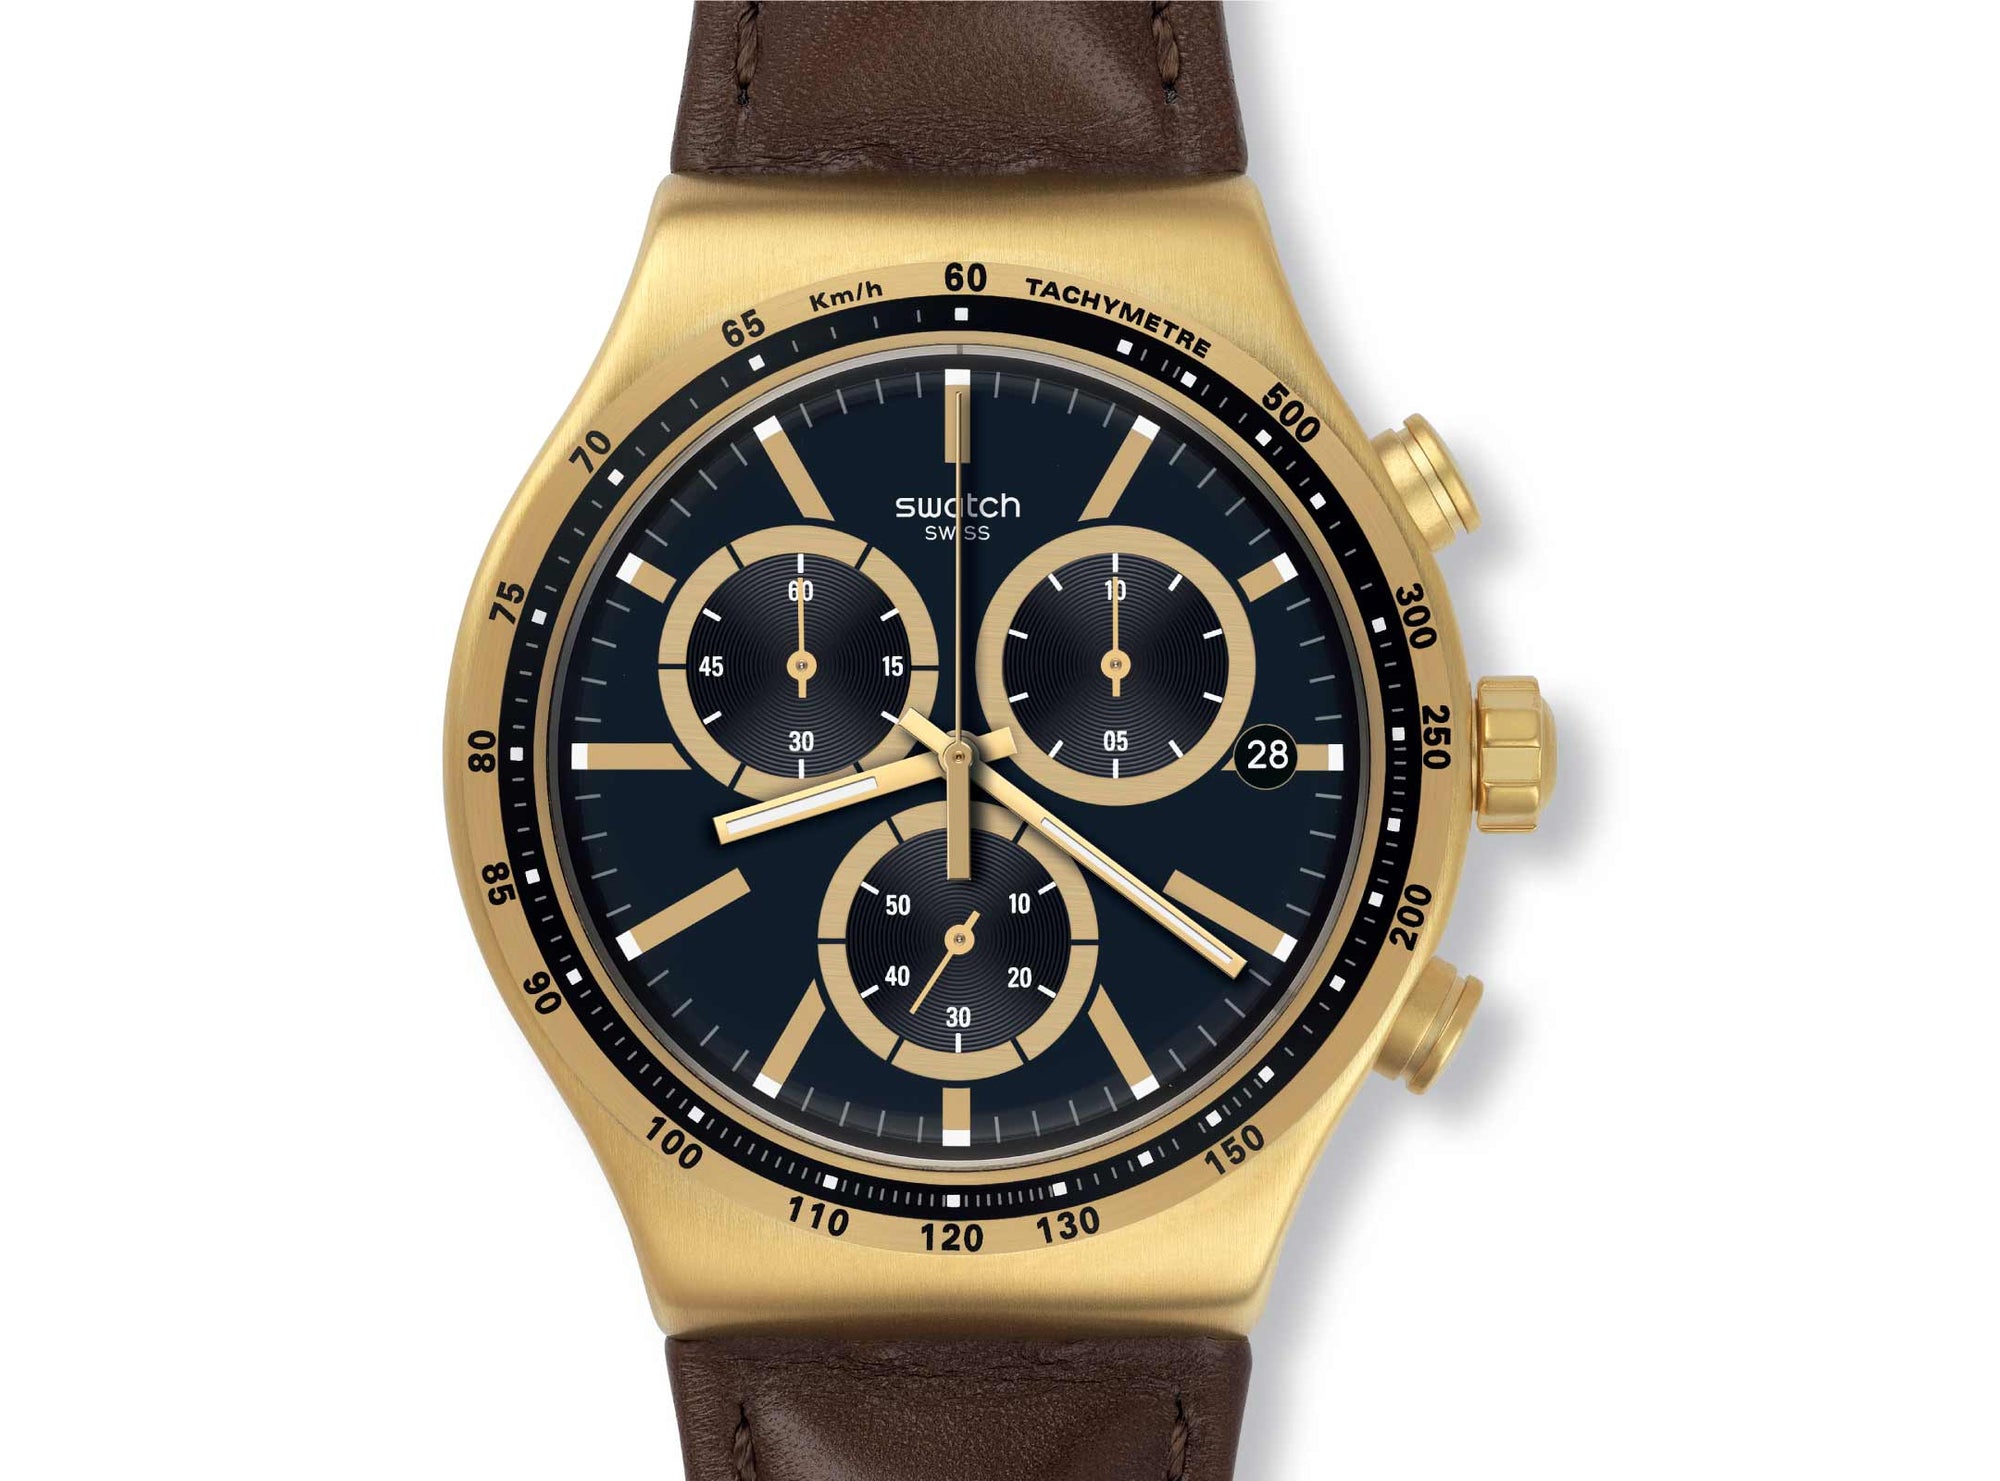 SWATCH - V'DOME - egywatch.com - Watches - Swatch